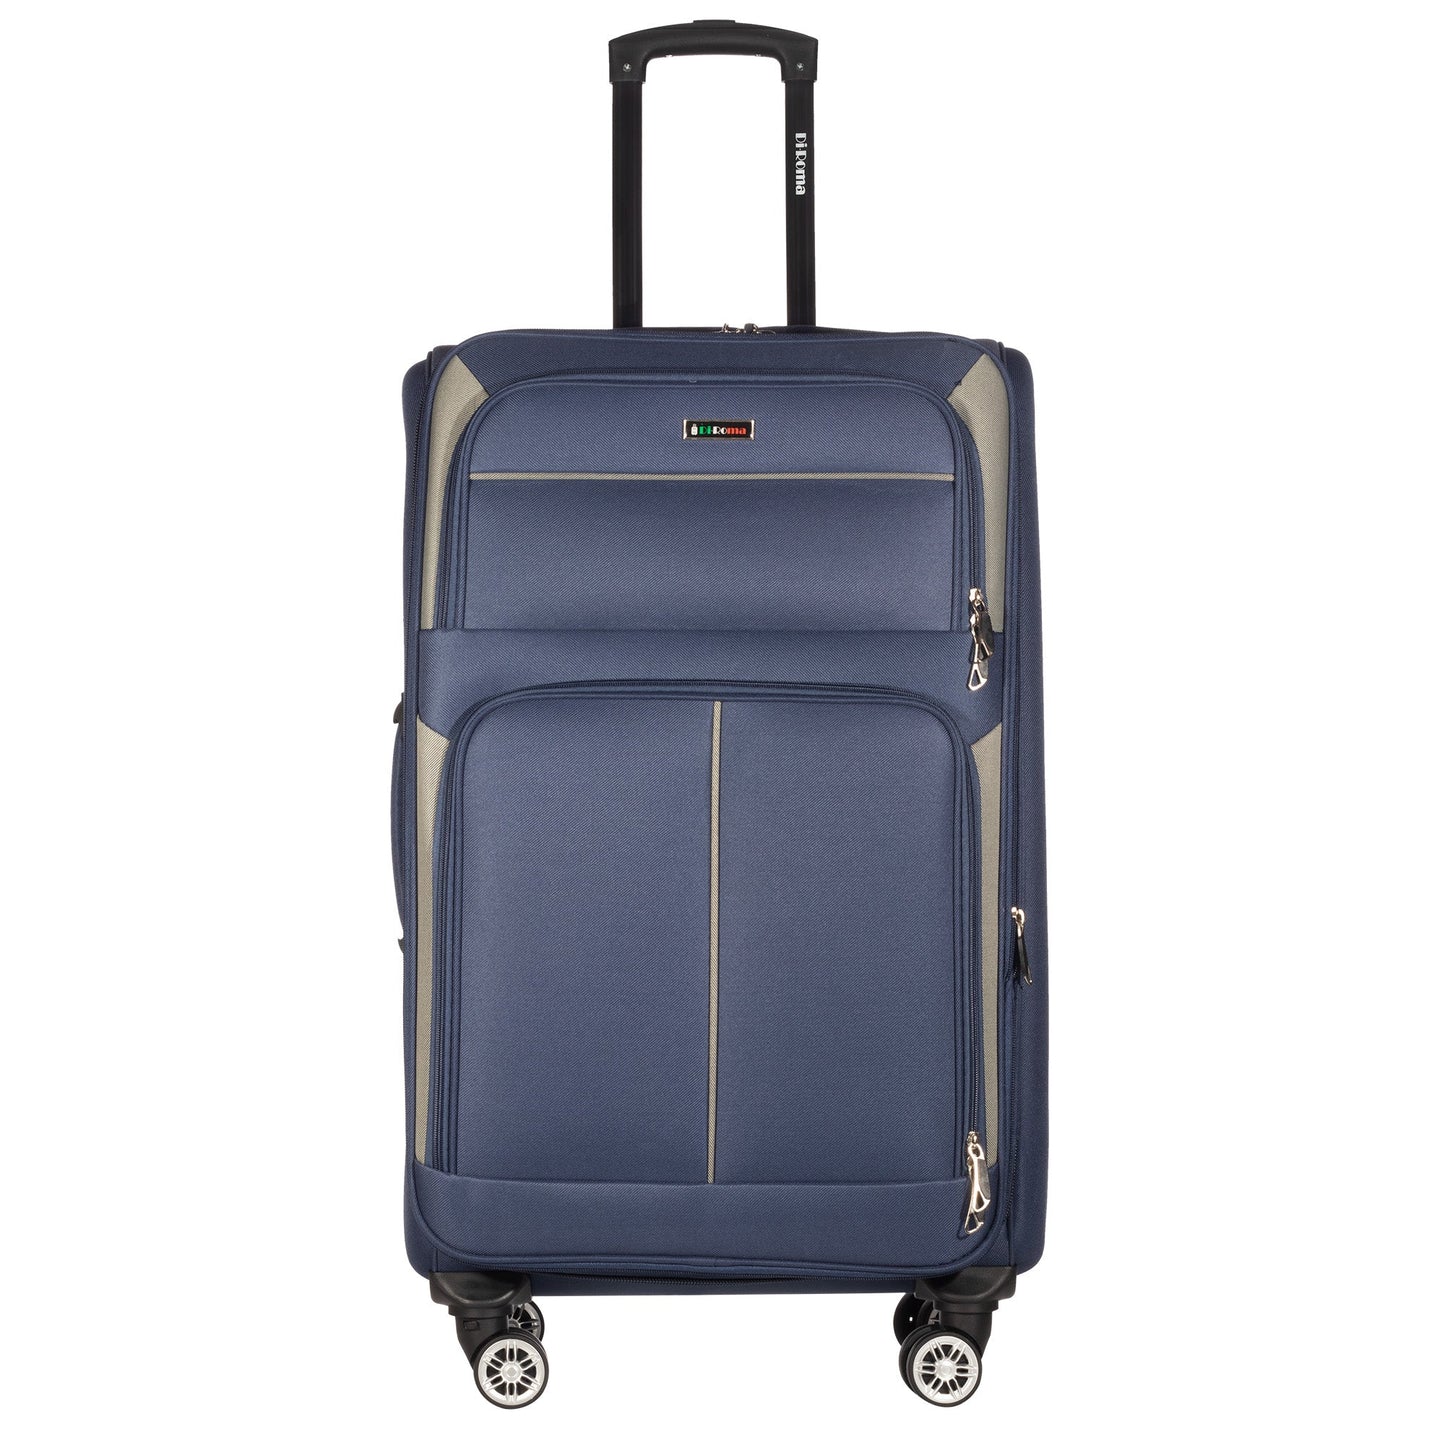 Star collection blue luggage (20/26/28/30") Suitcase Lock Spinner Hardshell